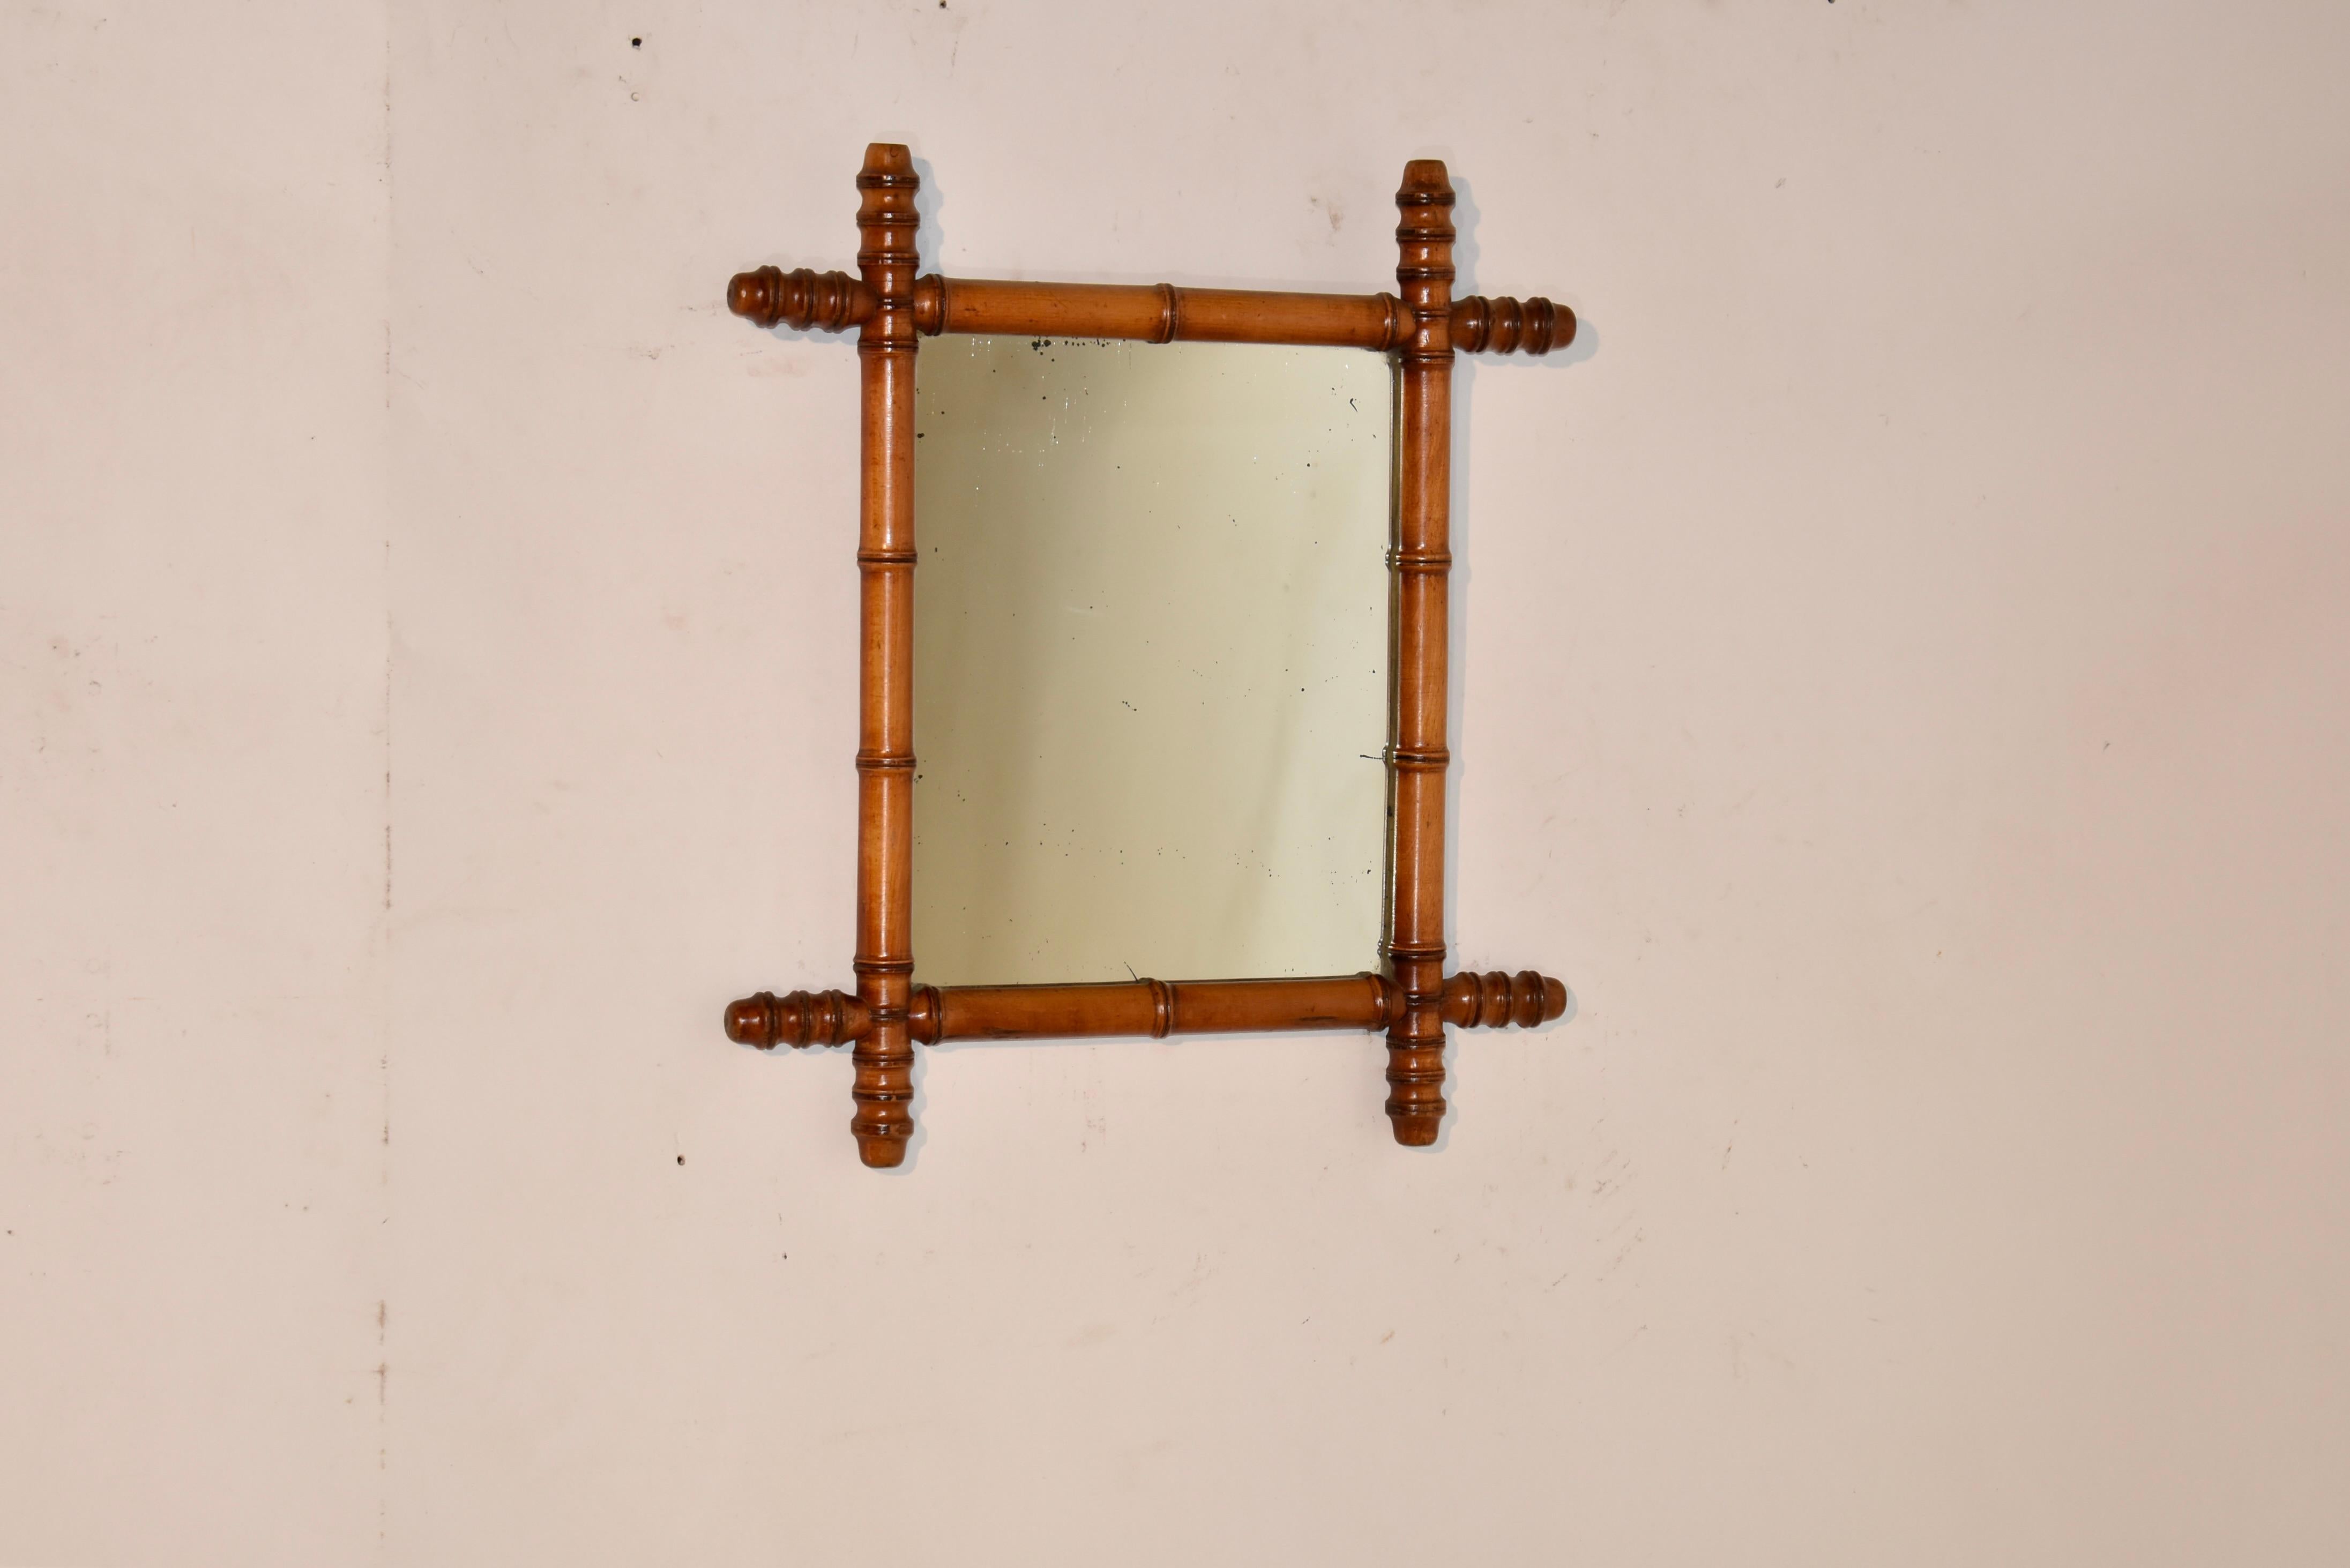 Late 19th century French faux bamboo turned mirror made from cherry.  The frame is turned to mimic bamboo, and is surrounding what appears to be its original mirror.  These are great looking, especially in a grouping.